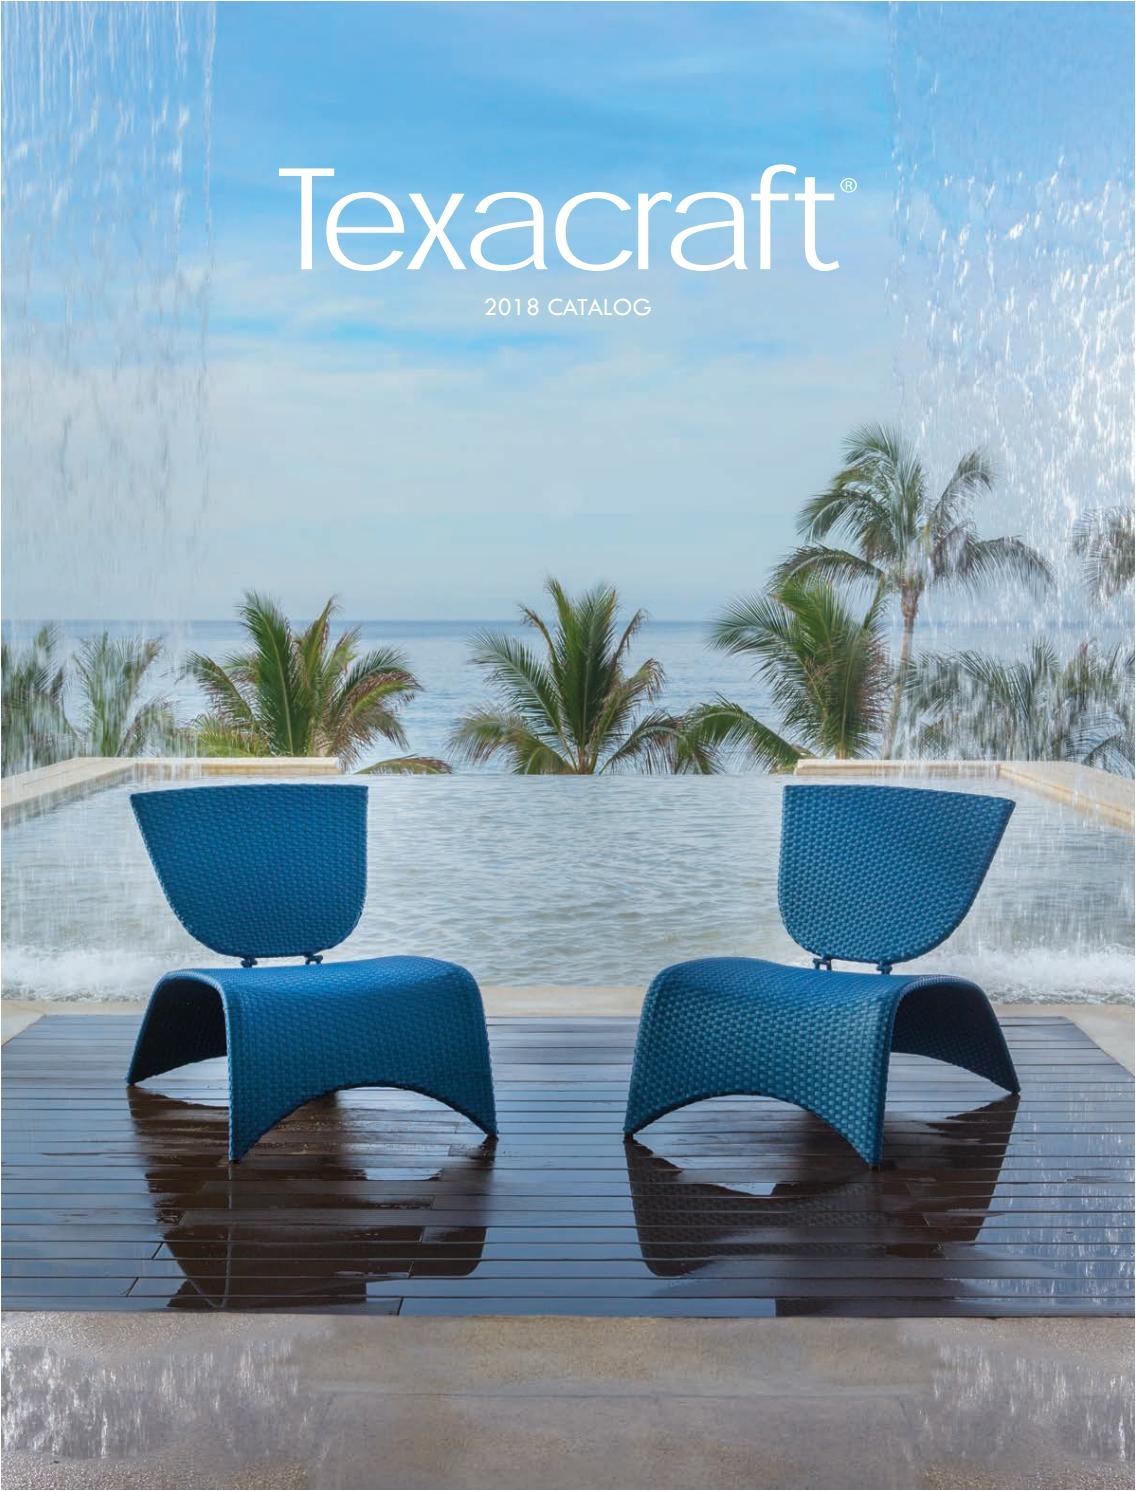 Captiva Designs 0-gravity Chair with Foam Pad and Canopy 2018 Texacraft Catalog by Winston Furniture issuu